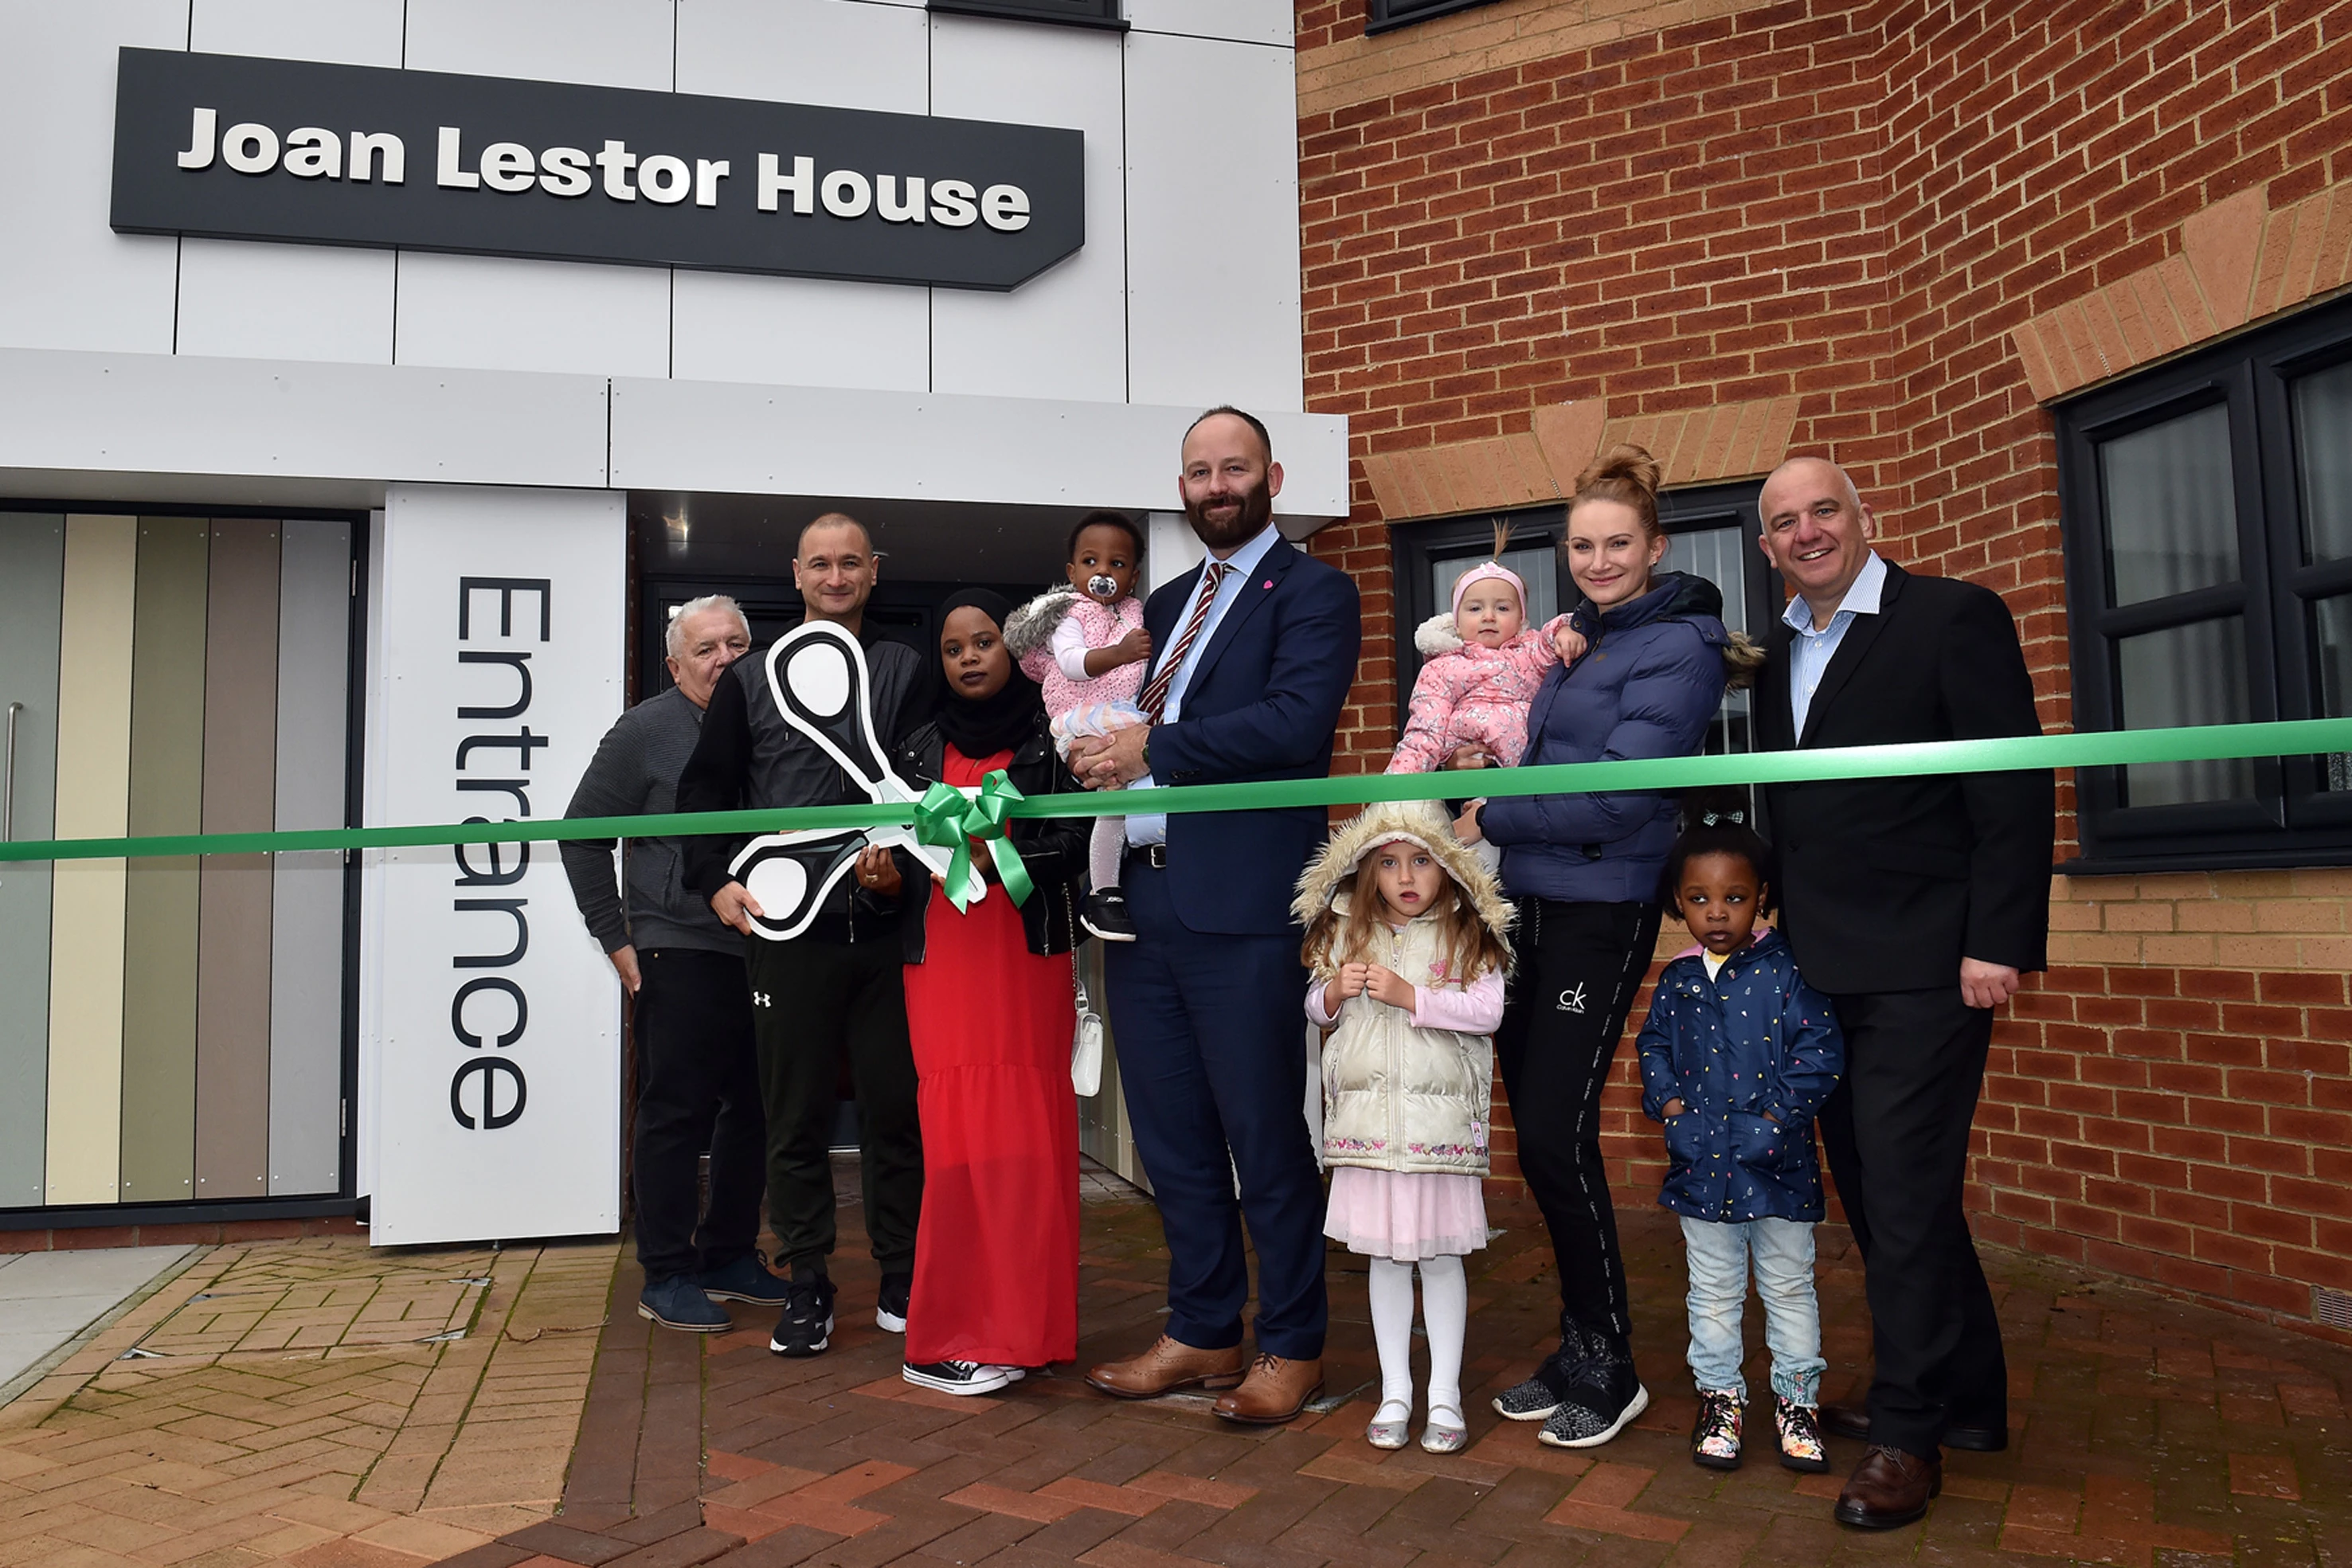 Mayor of Salford Paul Dennett and Salix Homes chief executive Lee Sugden with residents at the launch of the Joan Lestor House development Joan Lestor House has been transformed 